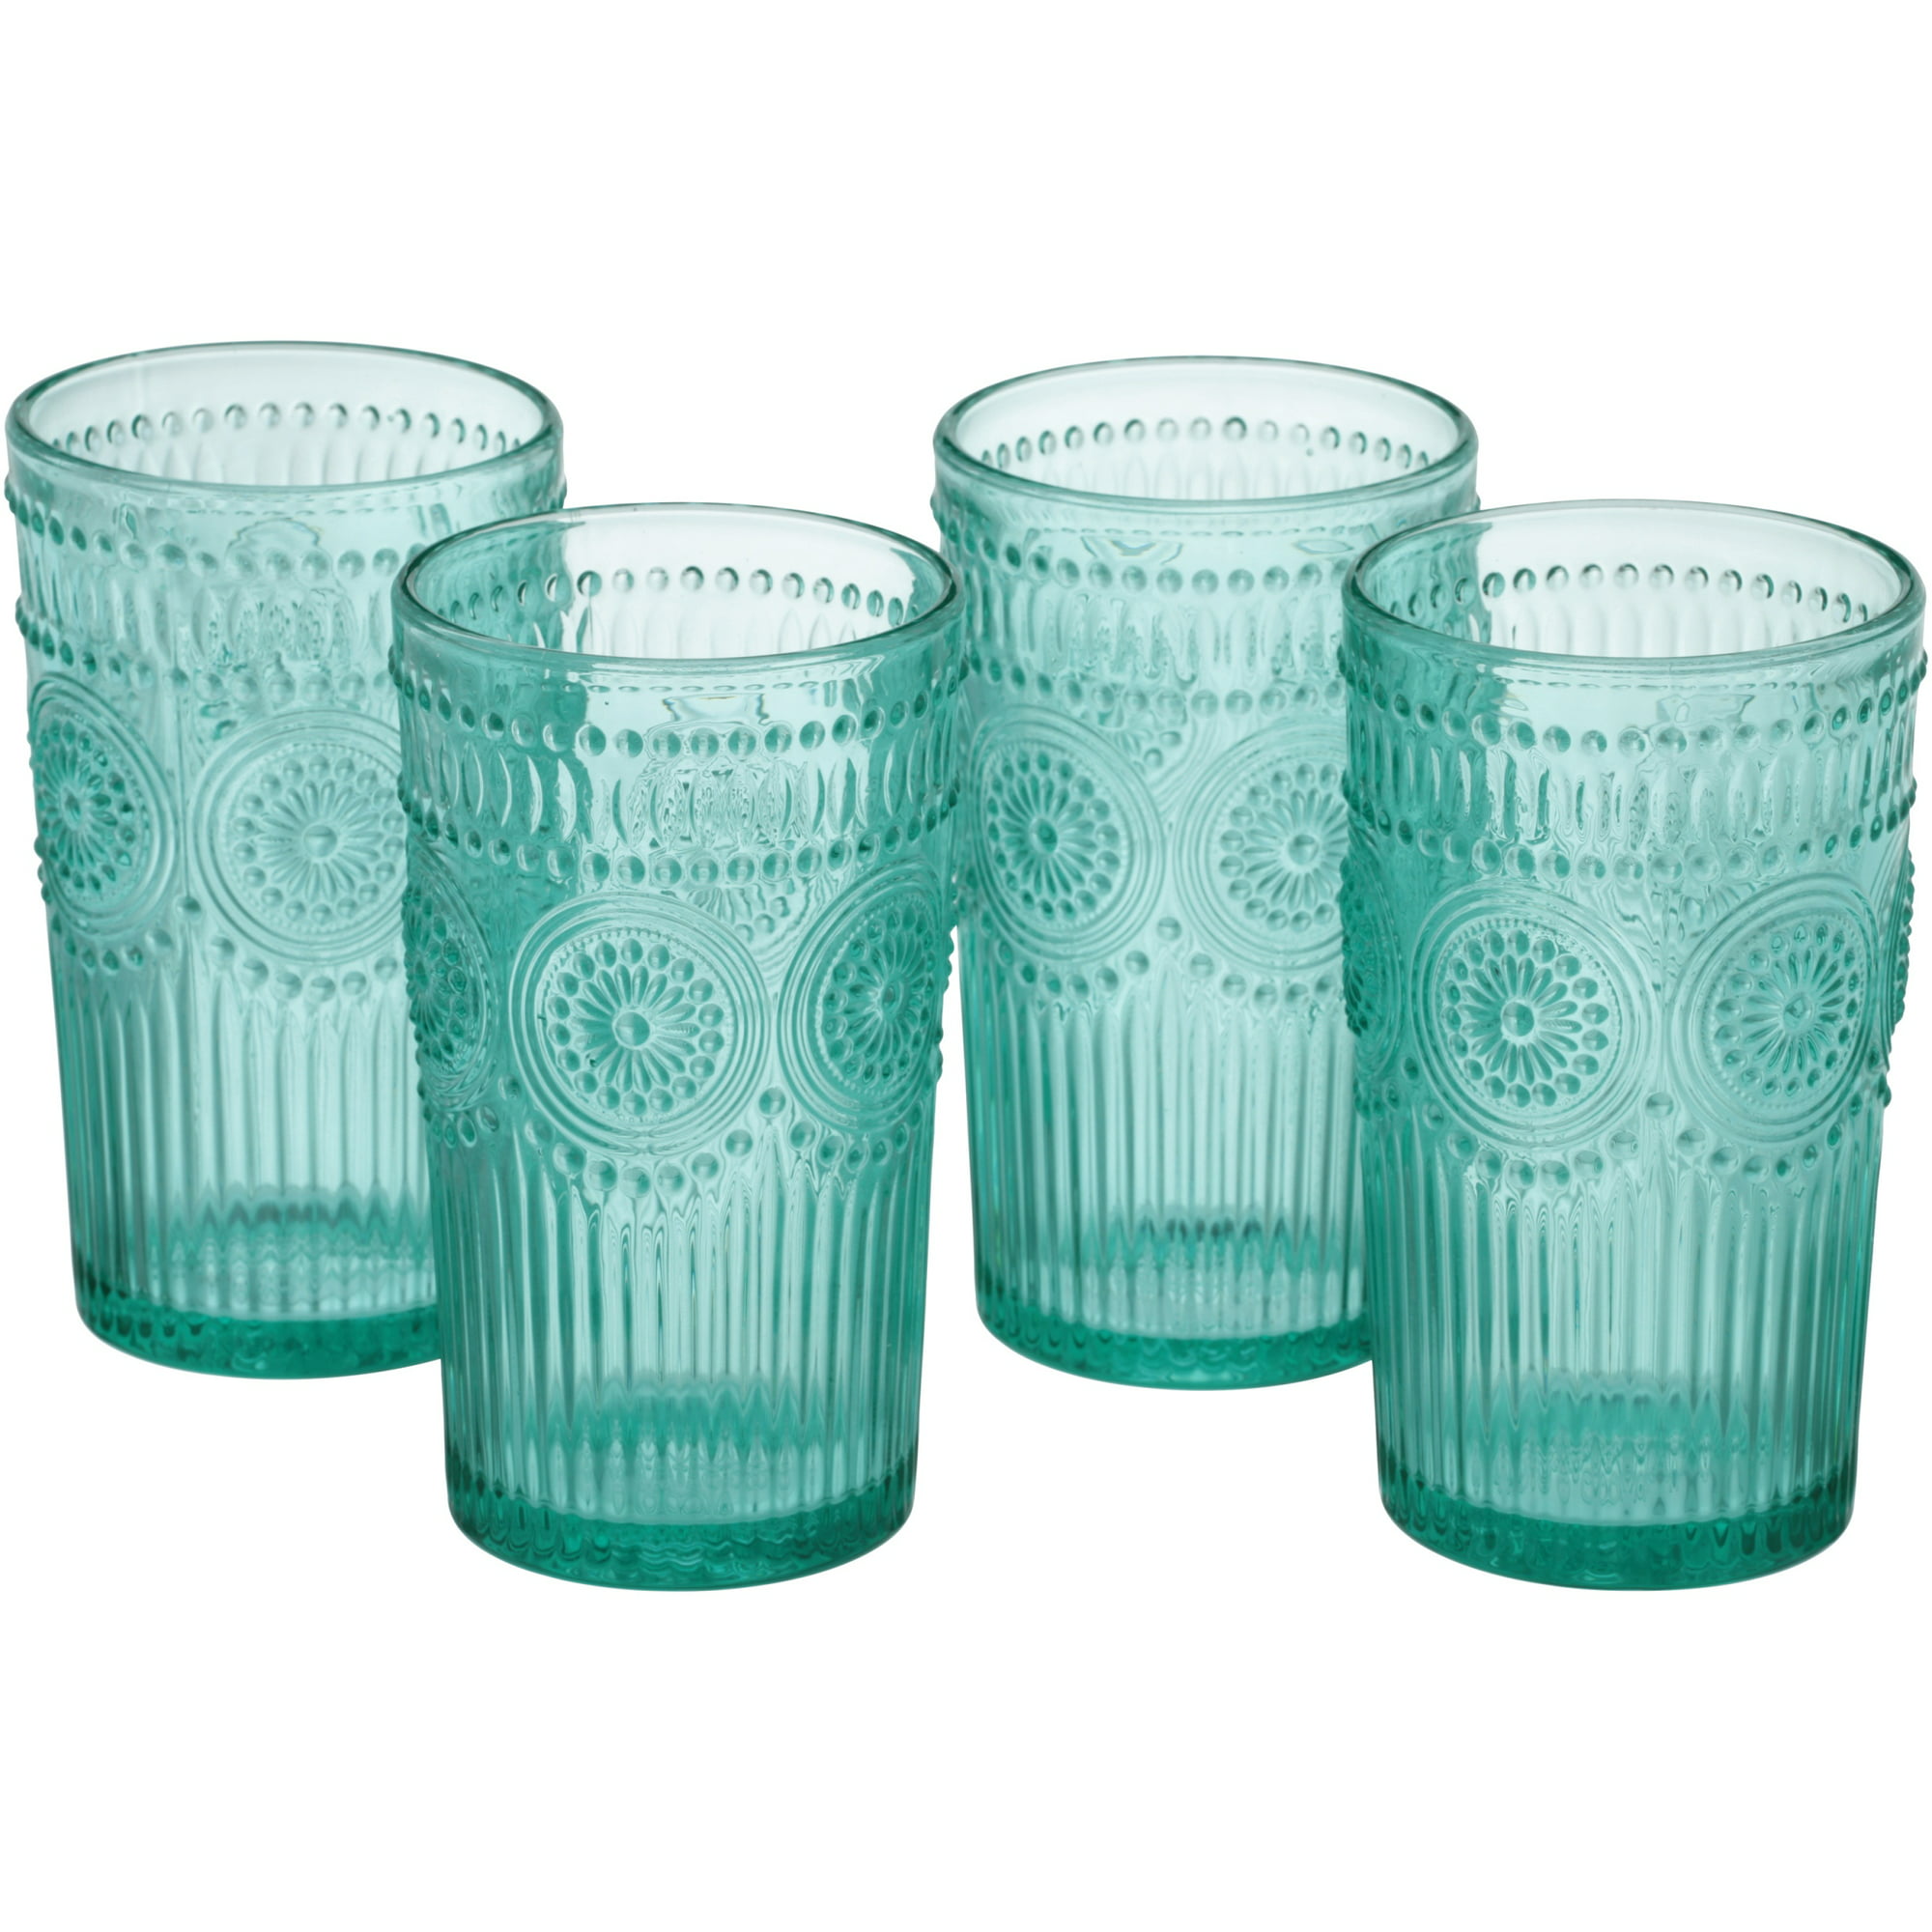 Set Of 4 Adeline Durable Dishwasher Safe Clear 16-Ounce Embossed Glass Tumblers